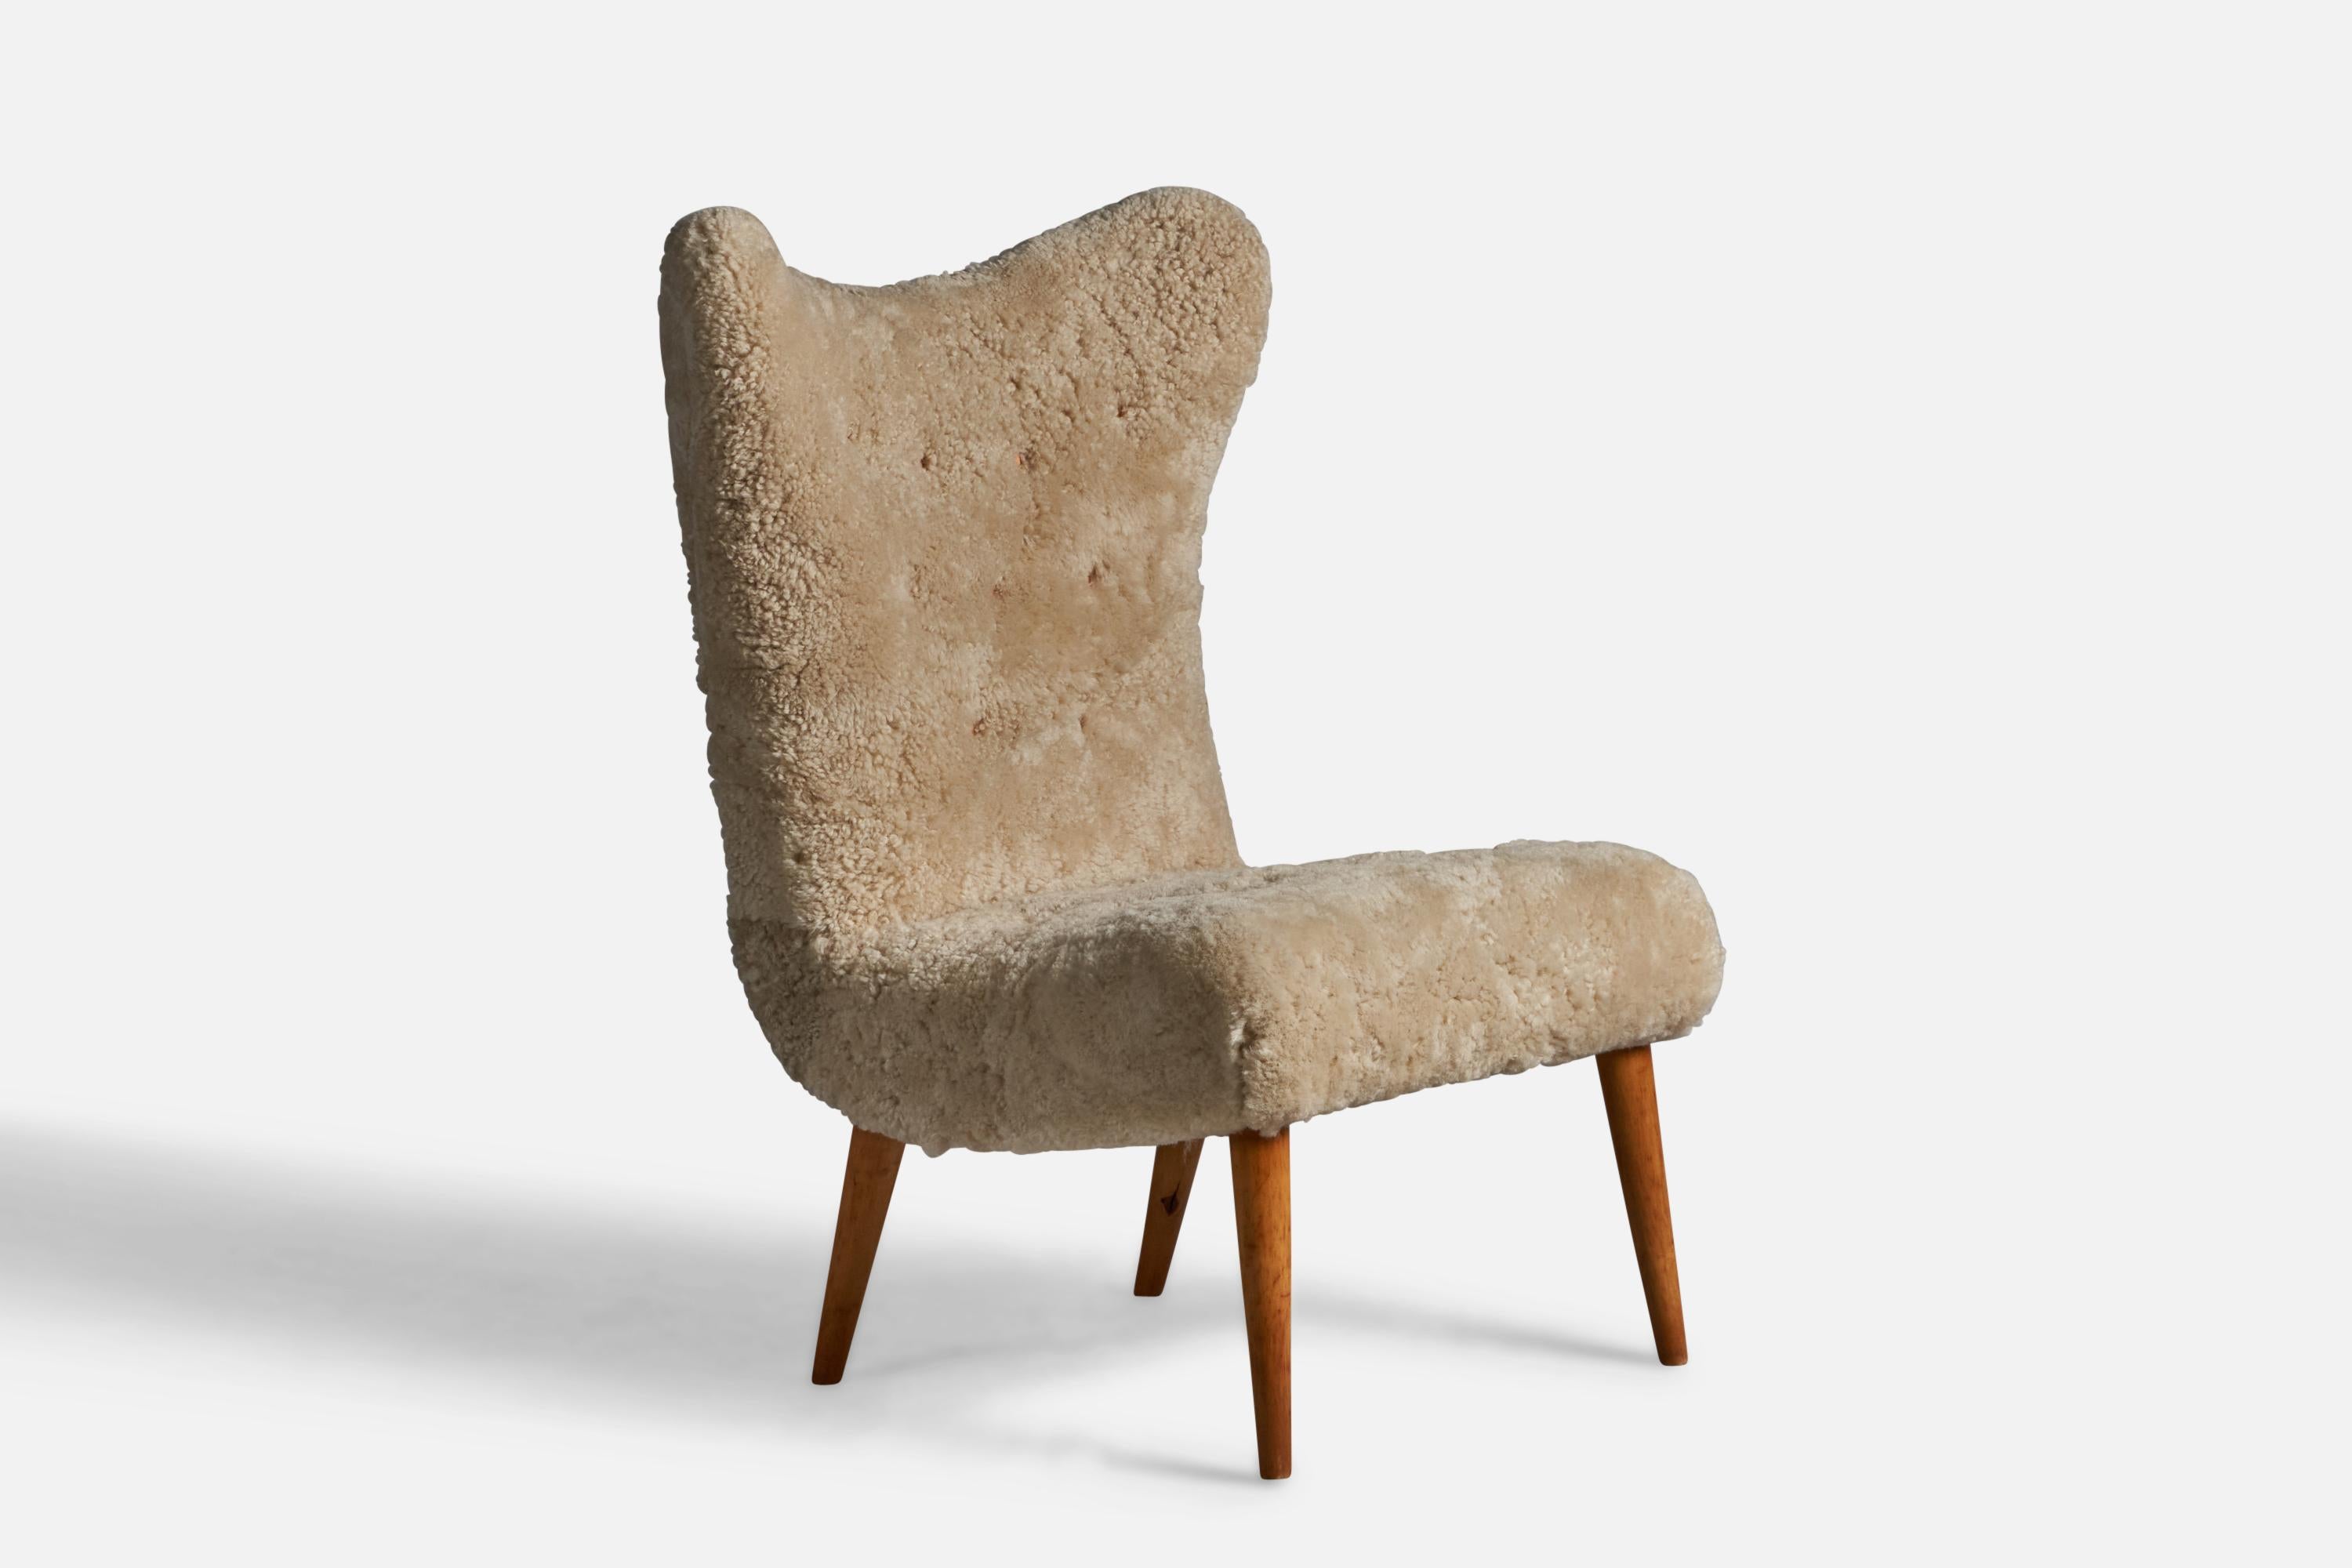 A wood and beige shearling lounge chair designed and produced in Sweden, 1950s.

16